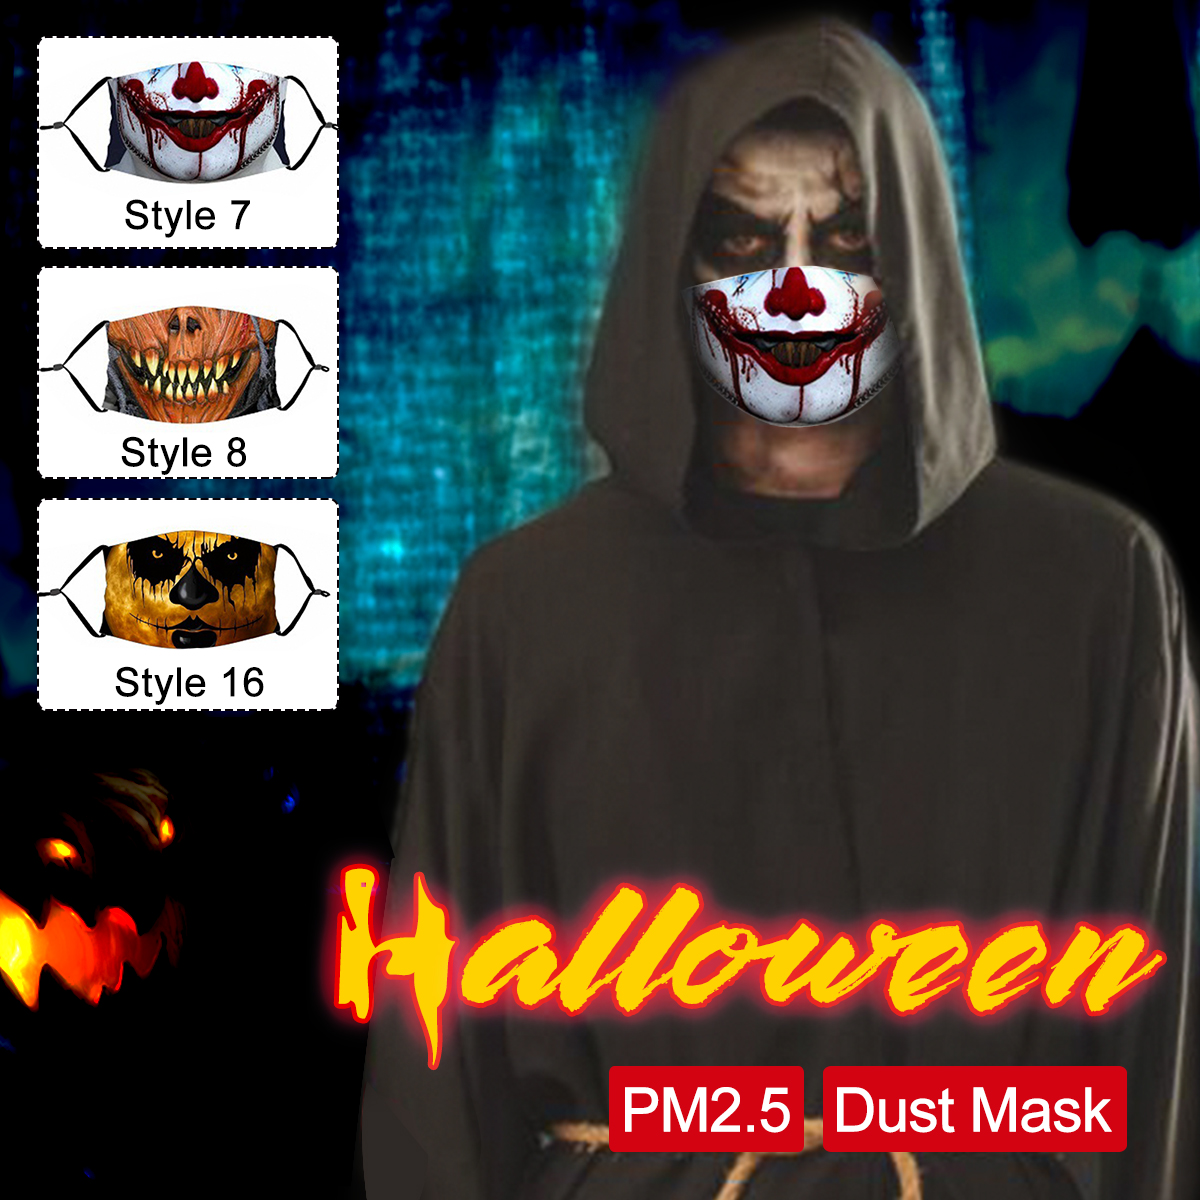 Adult-Halloween-Decoration-Dustproof-Mask-with-PM25-Filter-Element-Cosplay-Mask-1735626-2